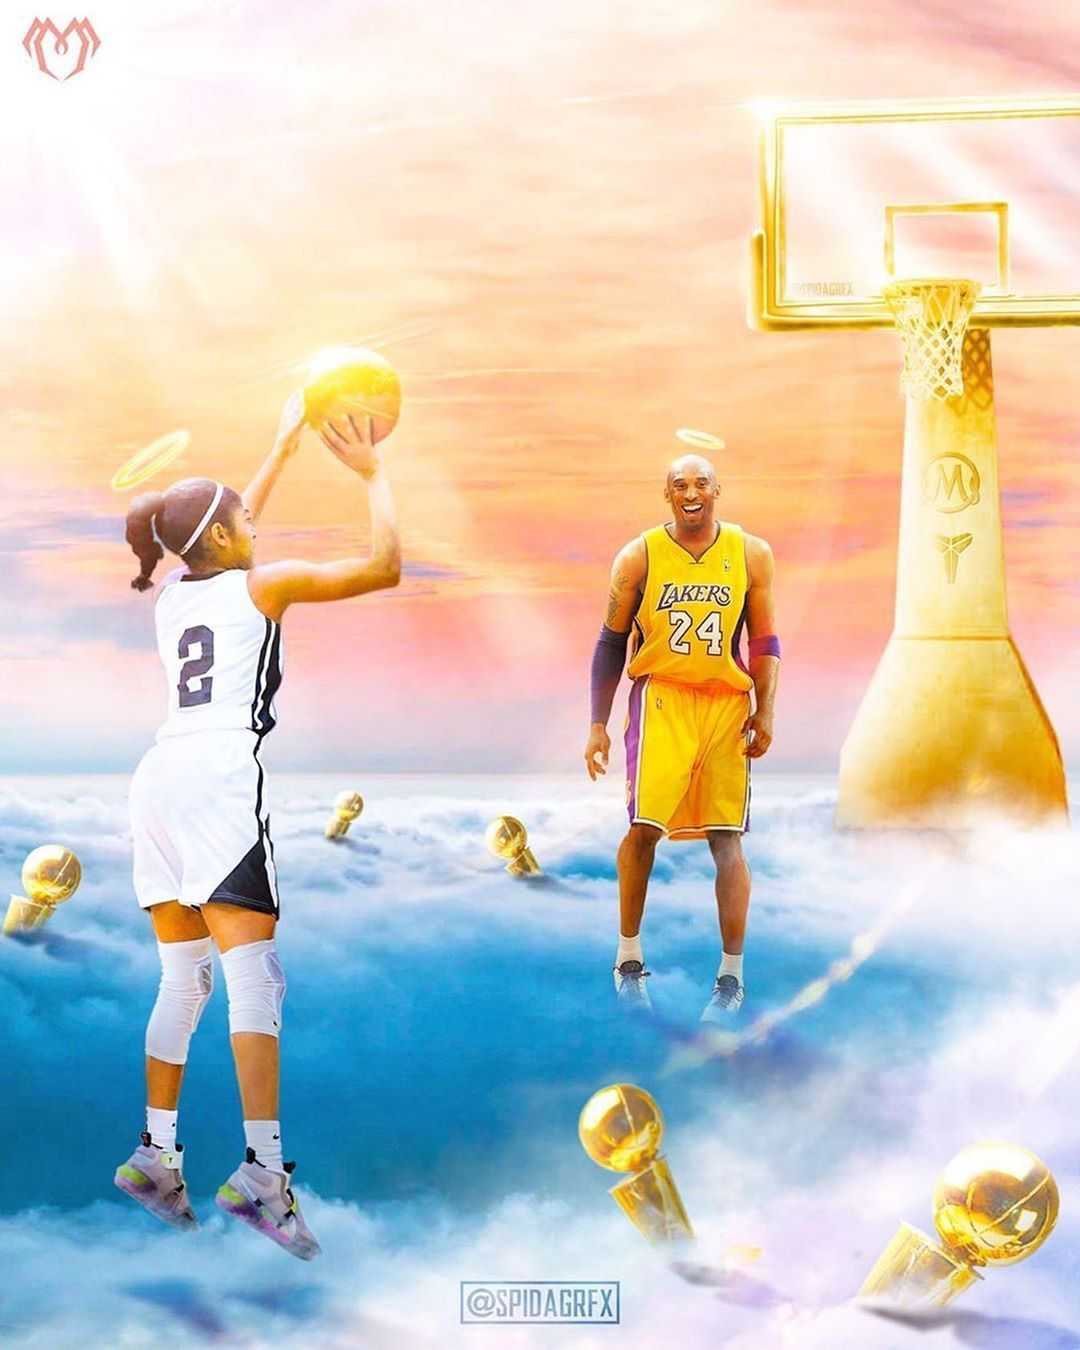 a picture of kobe and gigi